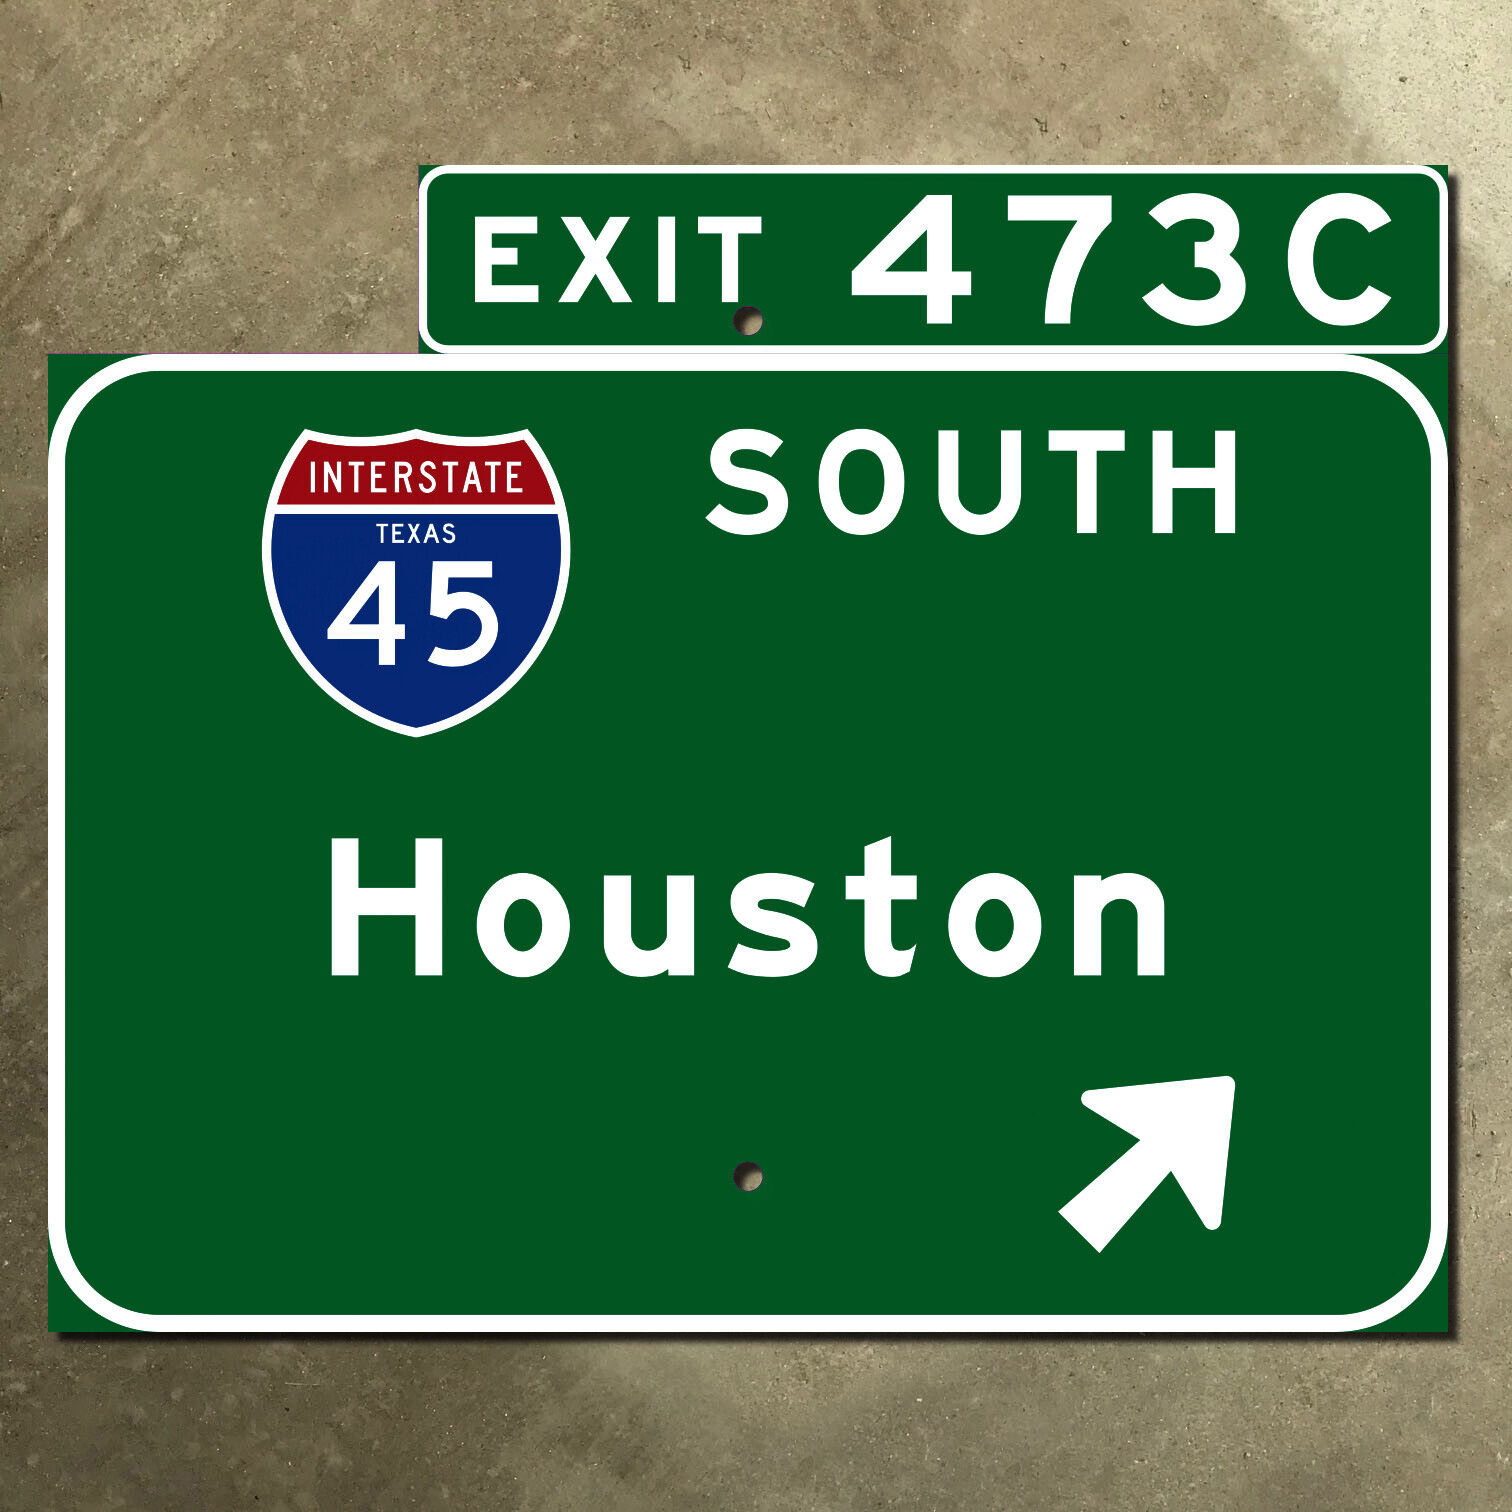 Texas Houston Interstate 45 South exit 473C 1961 highway marker road sign 12x10